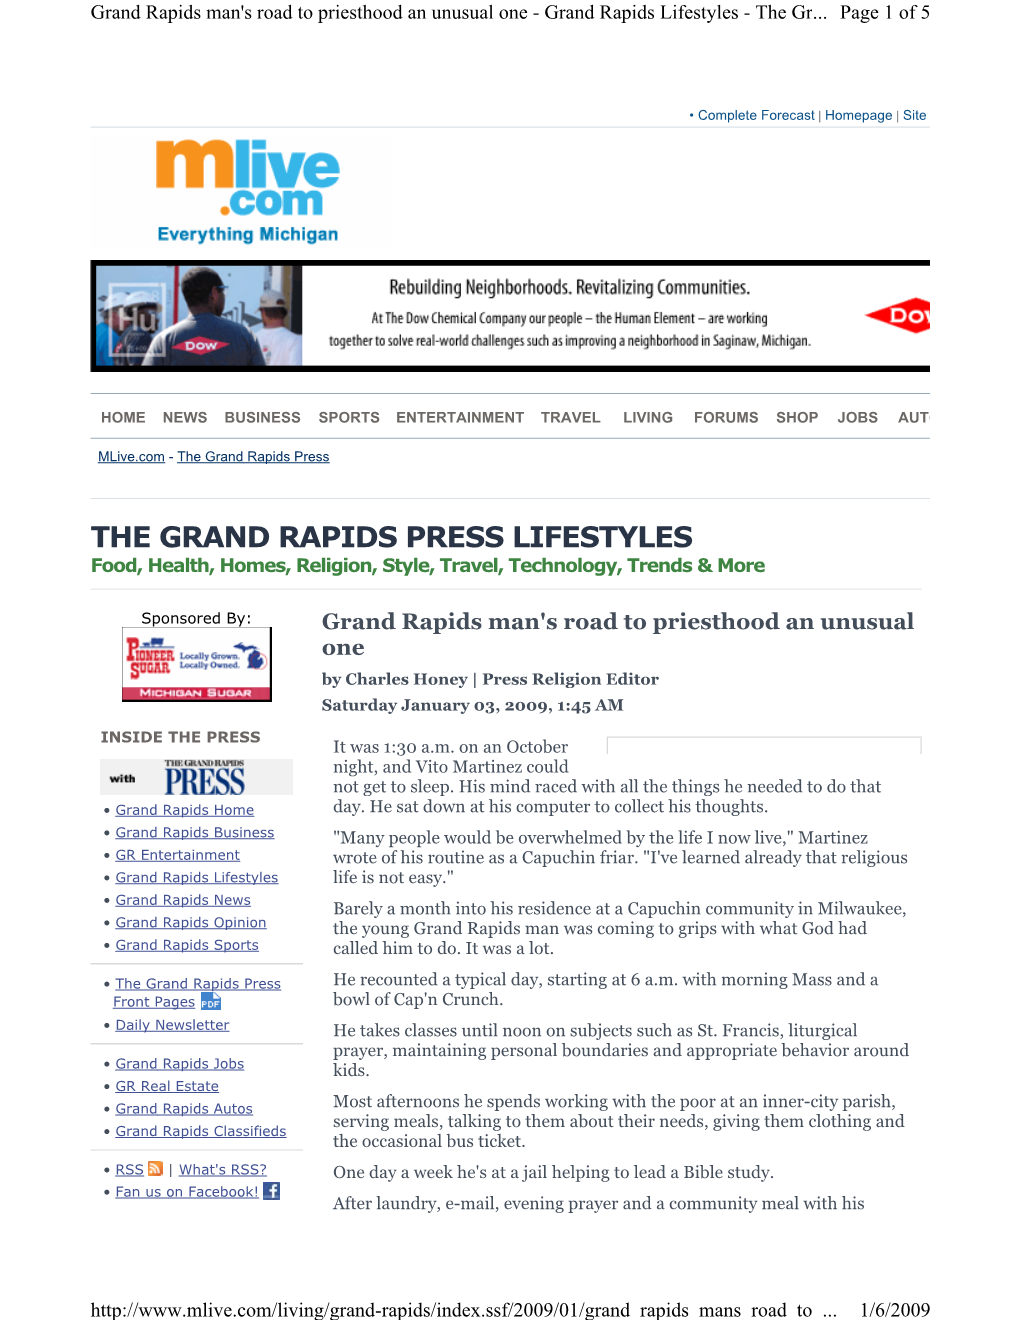 THE GRAND RAPIDS PRESS LIFESTYLES Food, Health, Homes, Religion, Style, Travel, Technology, Trends & More